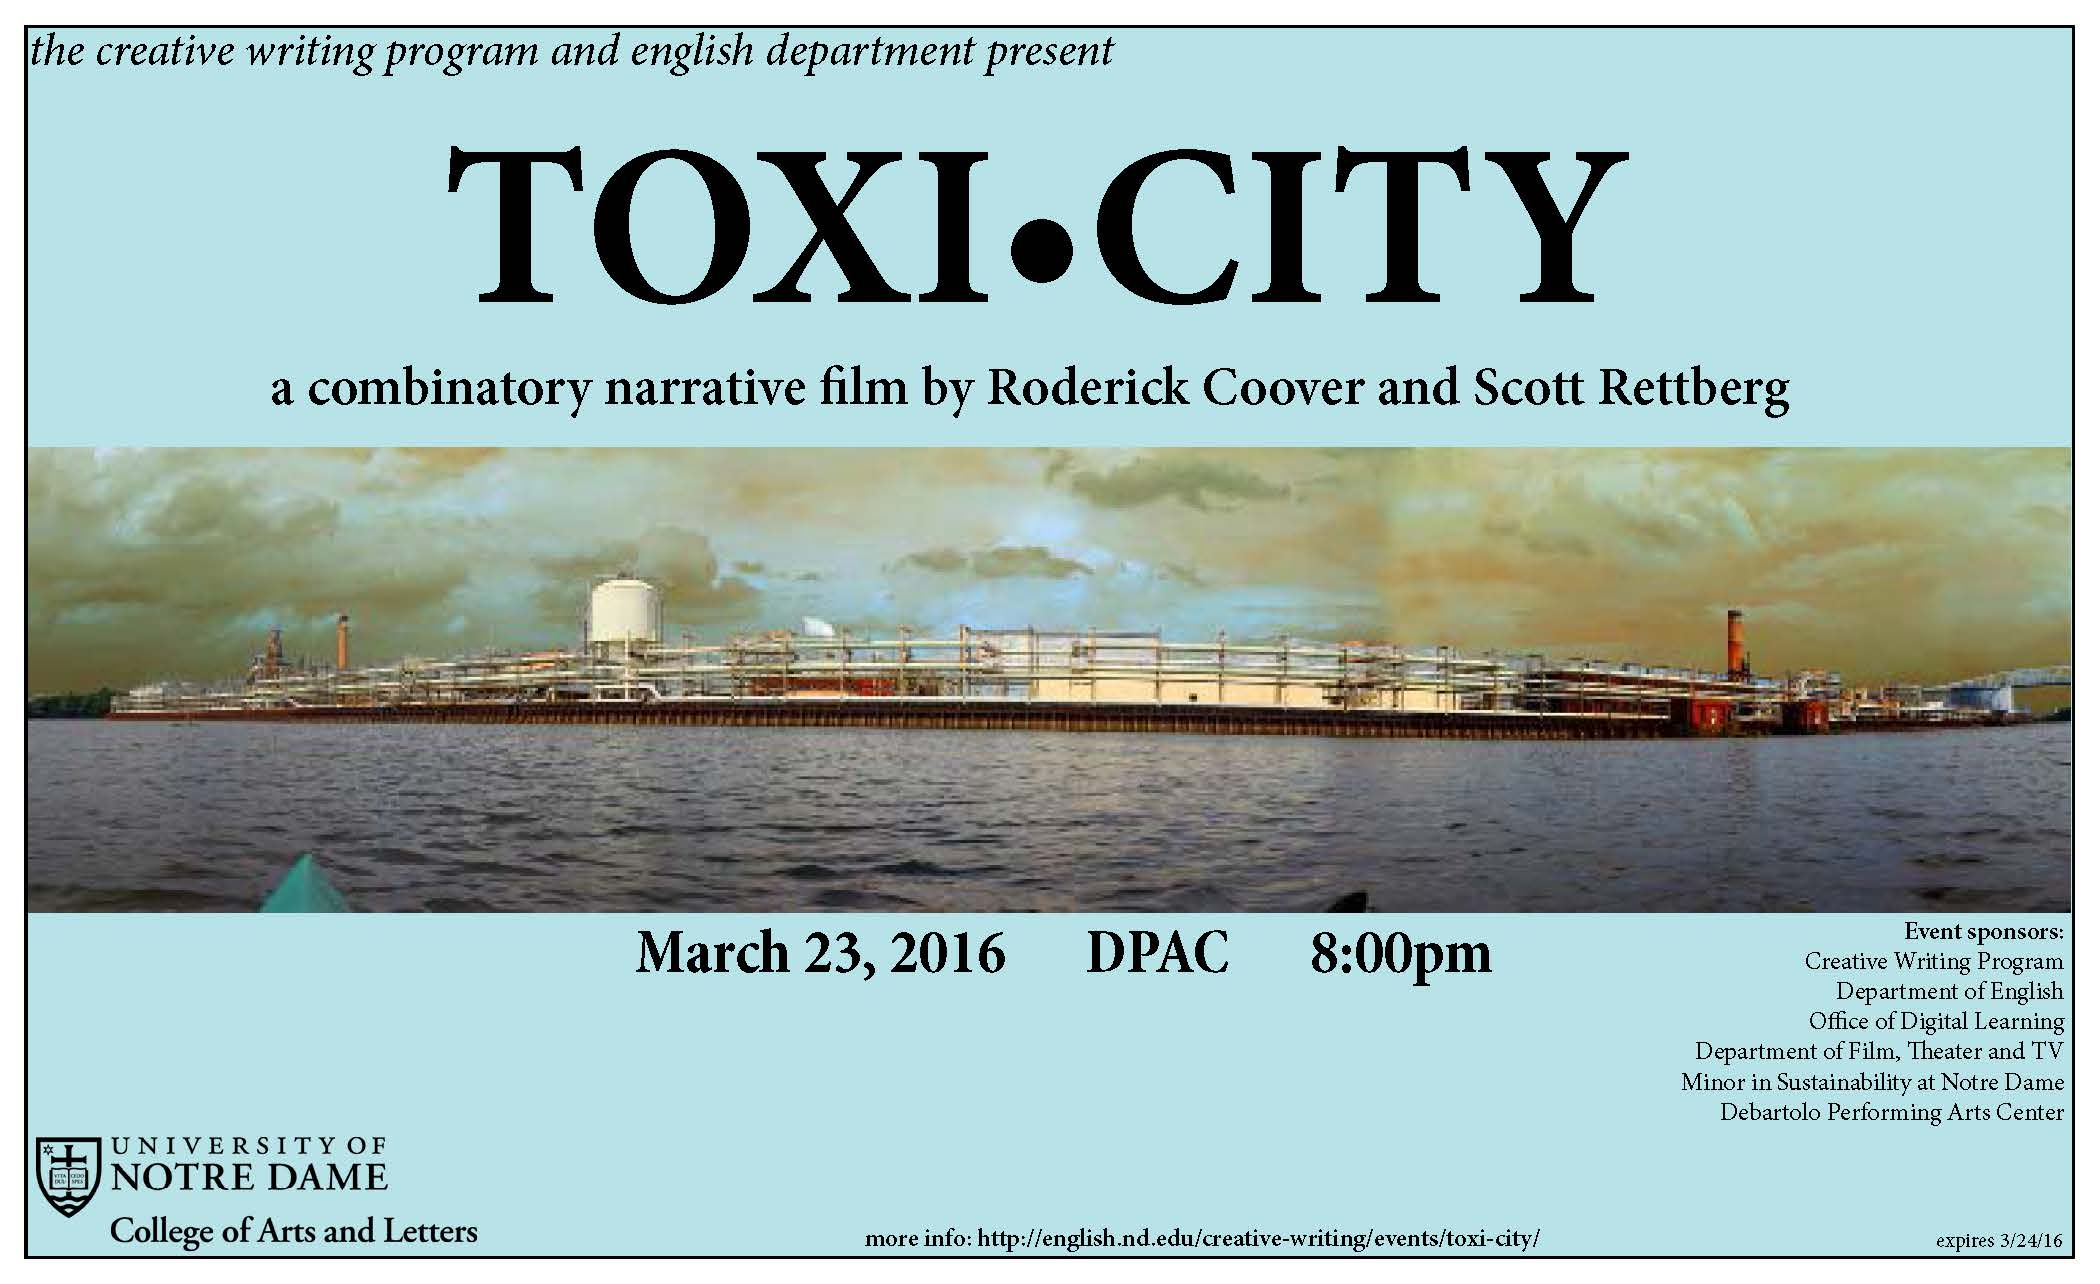 flyer_toxicitywithsponsors